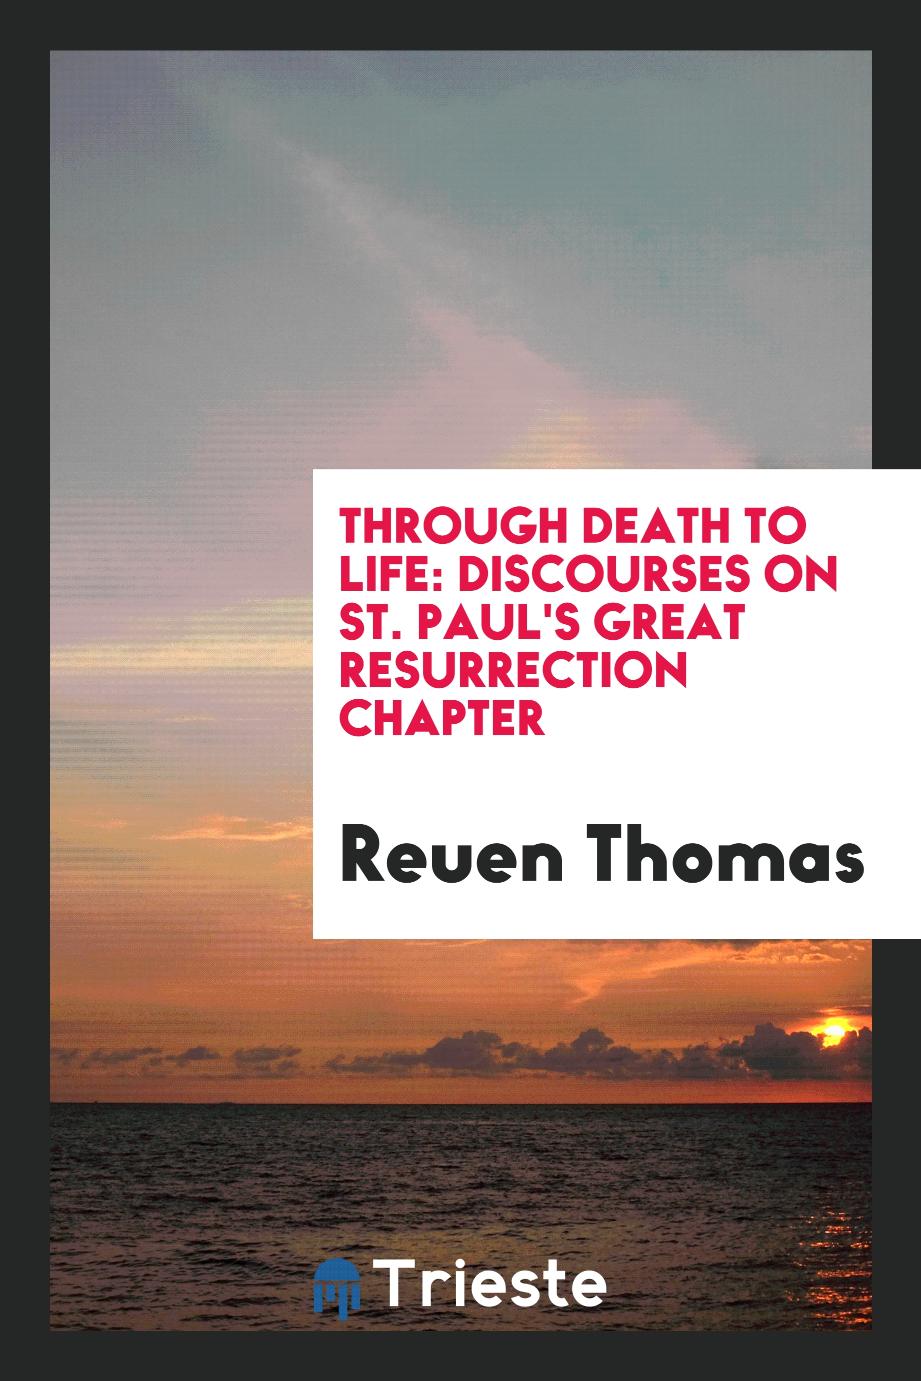 Through Death to Life: Discourses on St. Paul's Great Resurrection Chapter